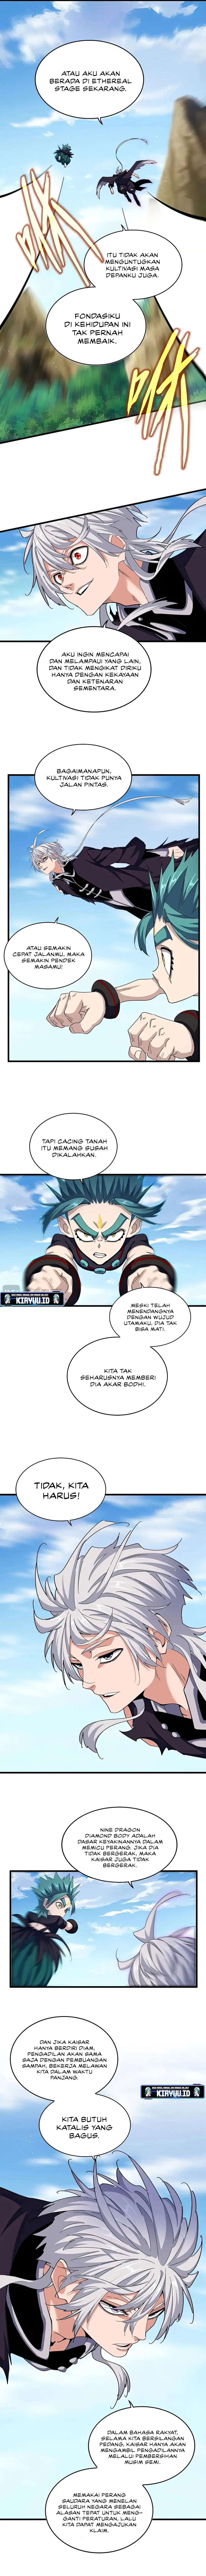 Magic Emperor Chapter 485 Image 2